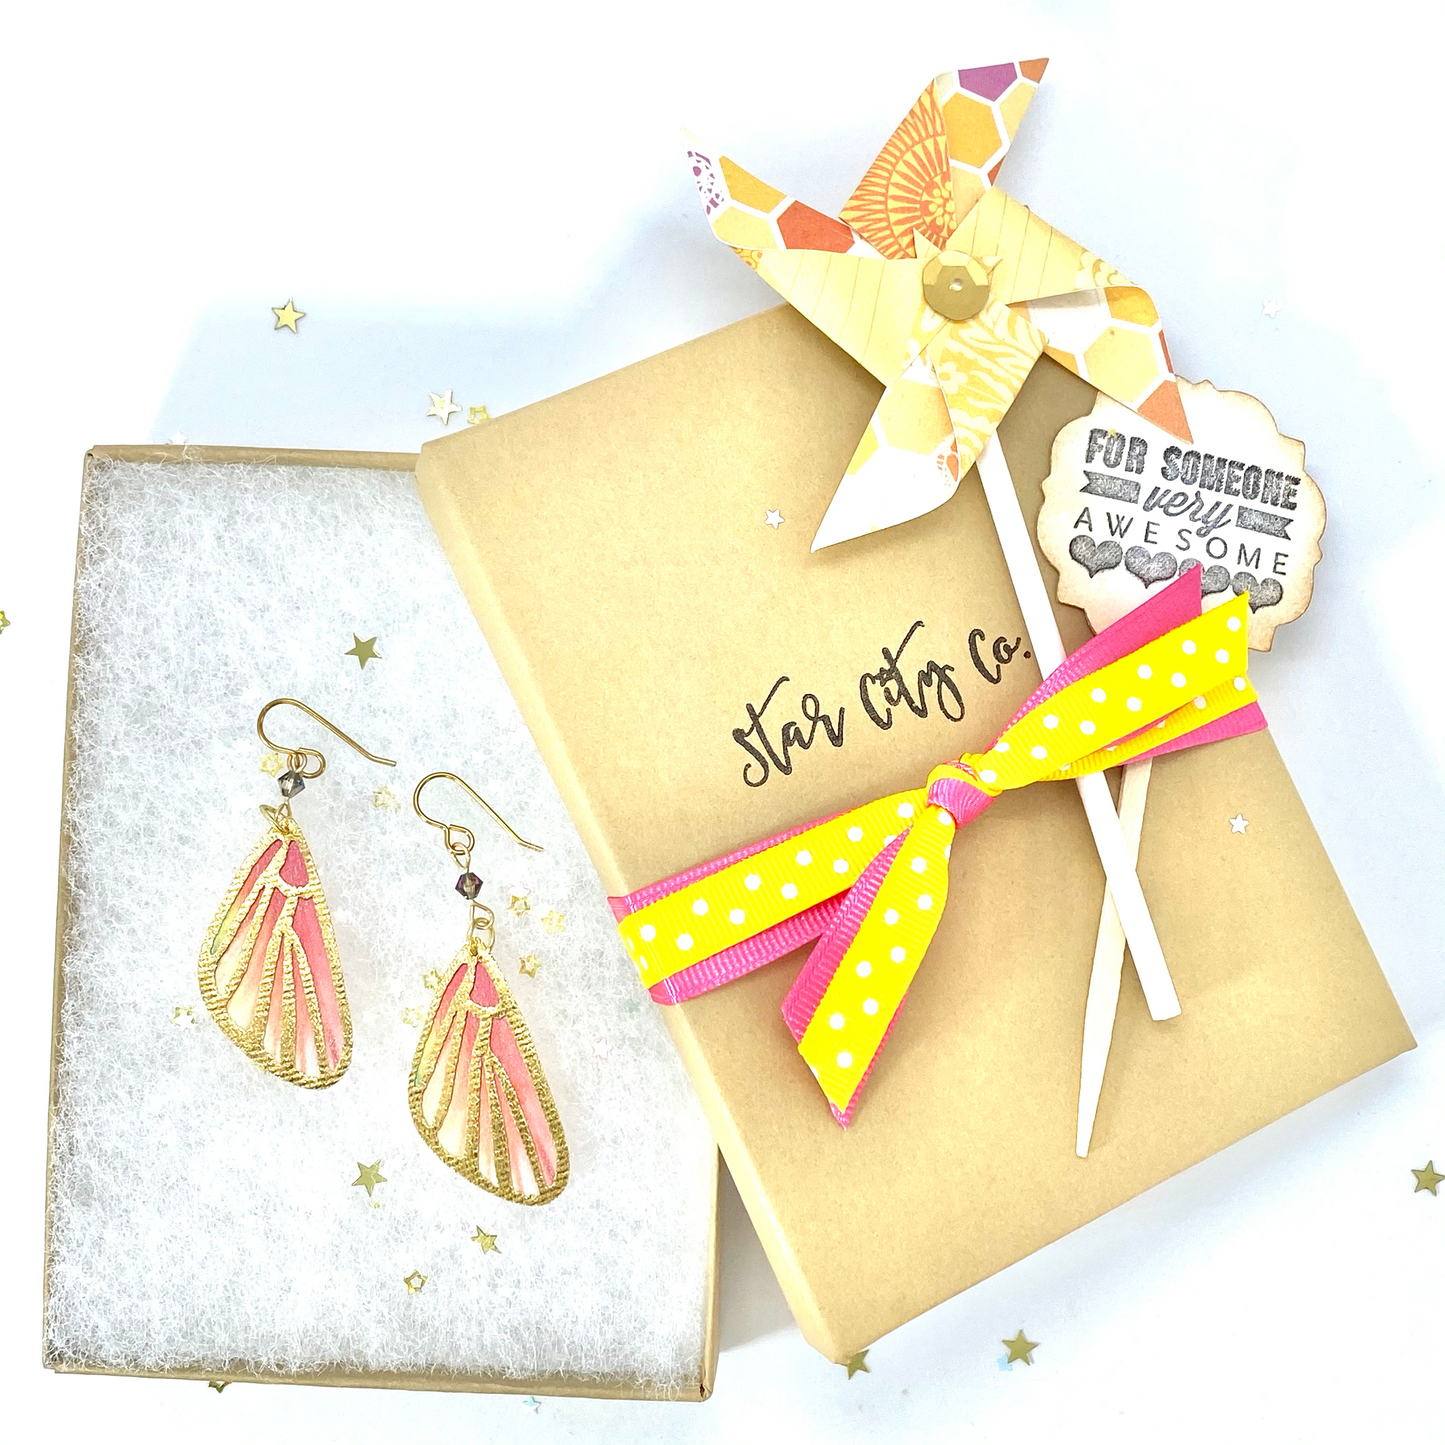 Fairy Wings or Butterfly Wing Earrings - Coral and Yellow